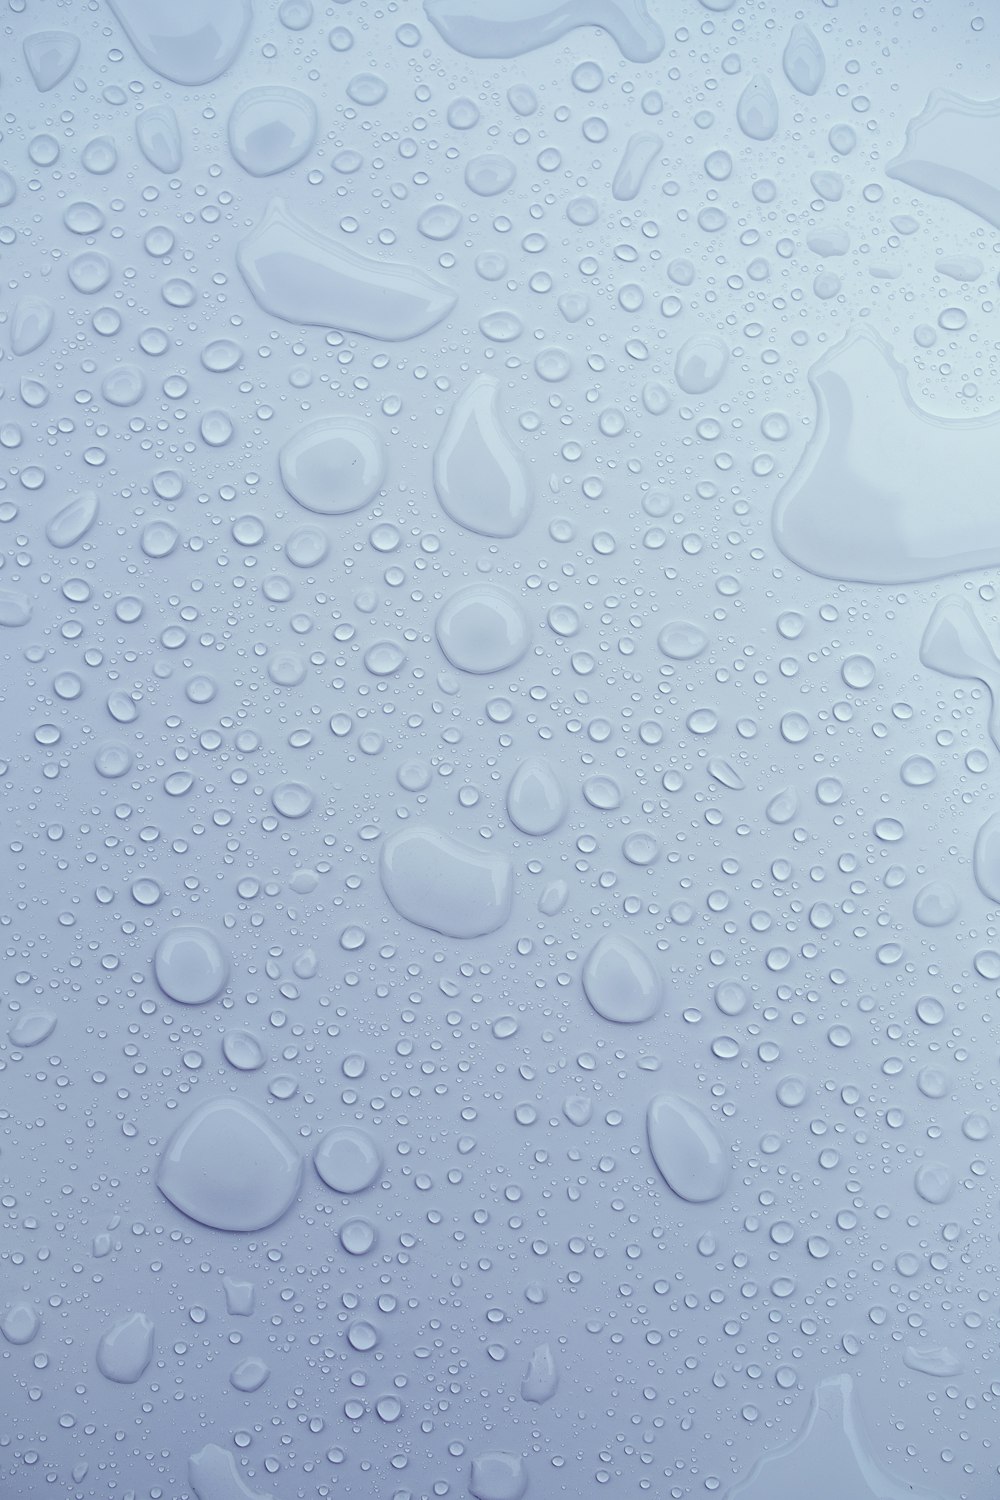 a close up of water droplets on a surface